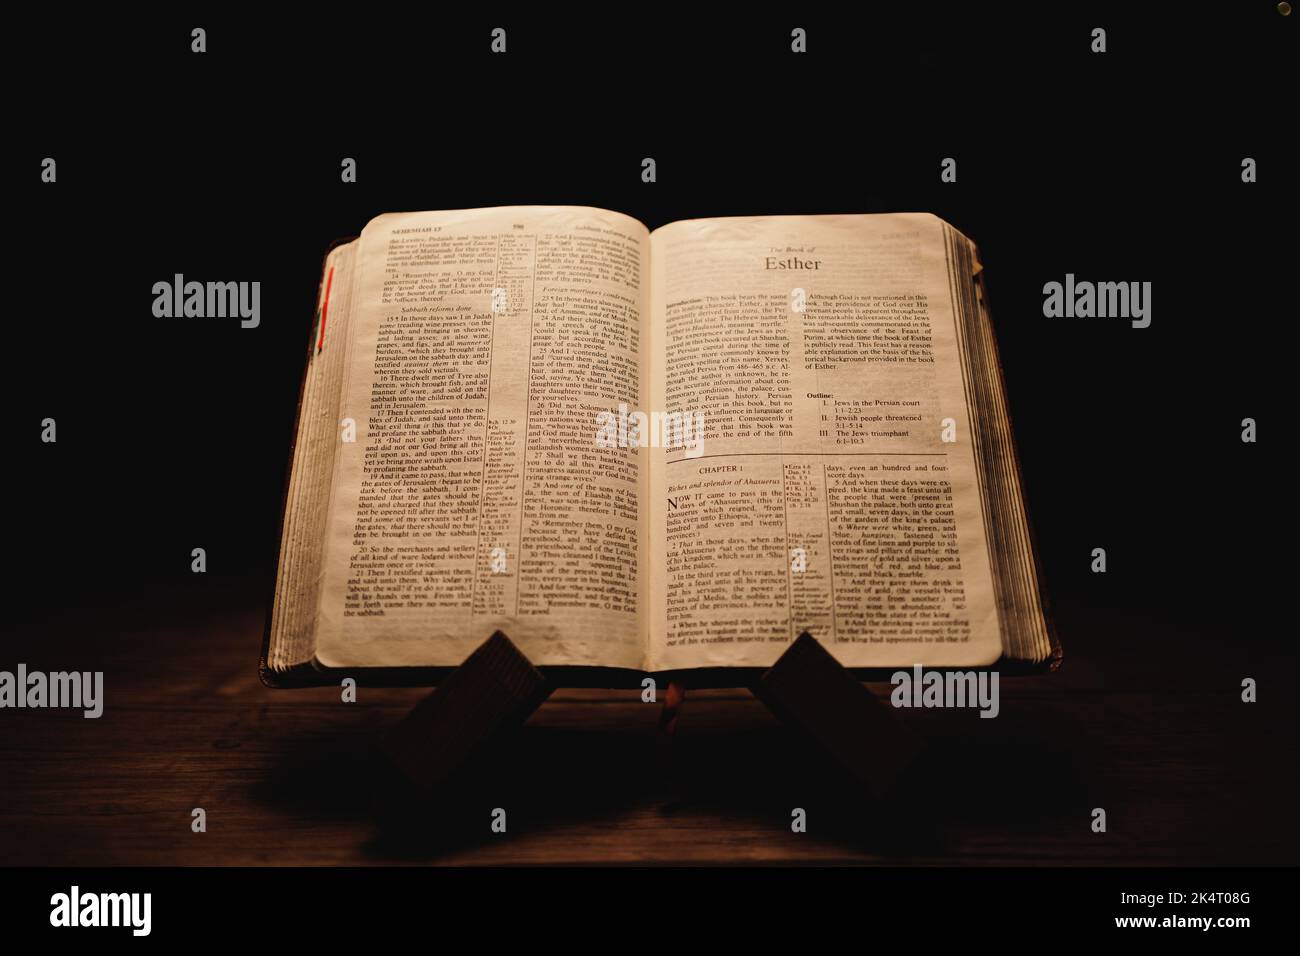 A closeup shot of a historic old Bible open on the Esther pages on display in a dark room Stock Photo